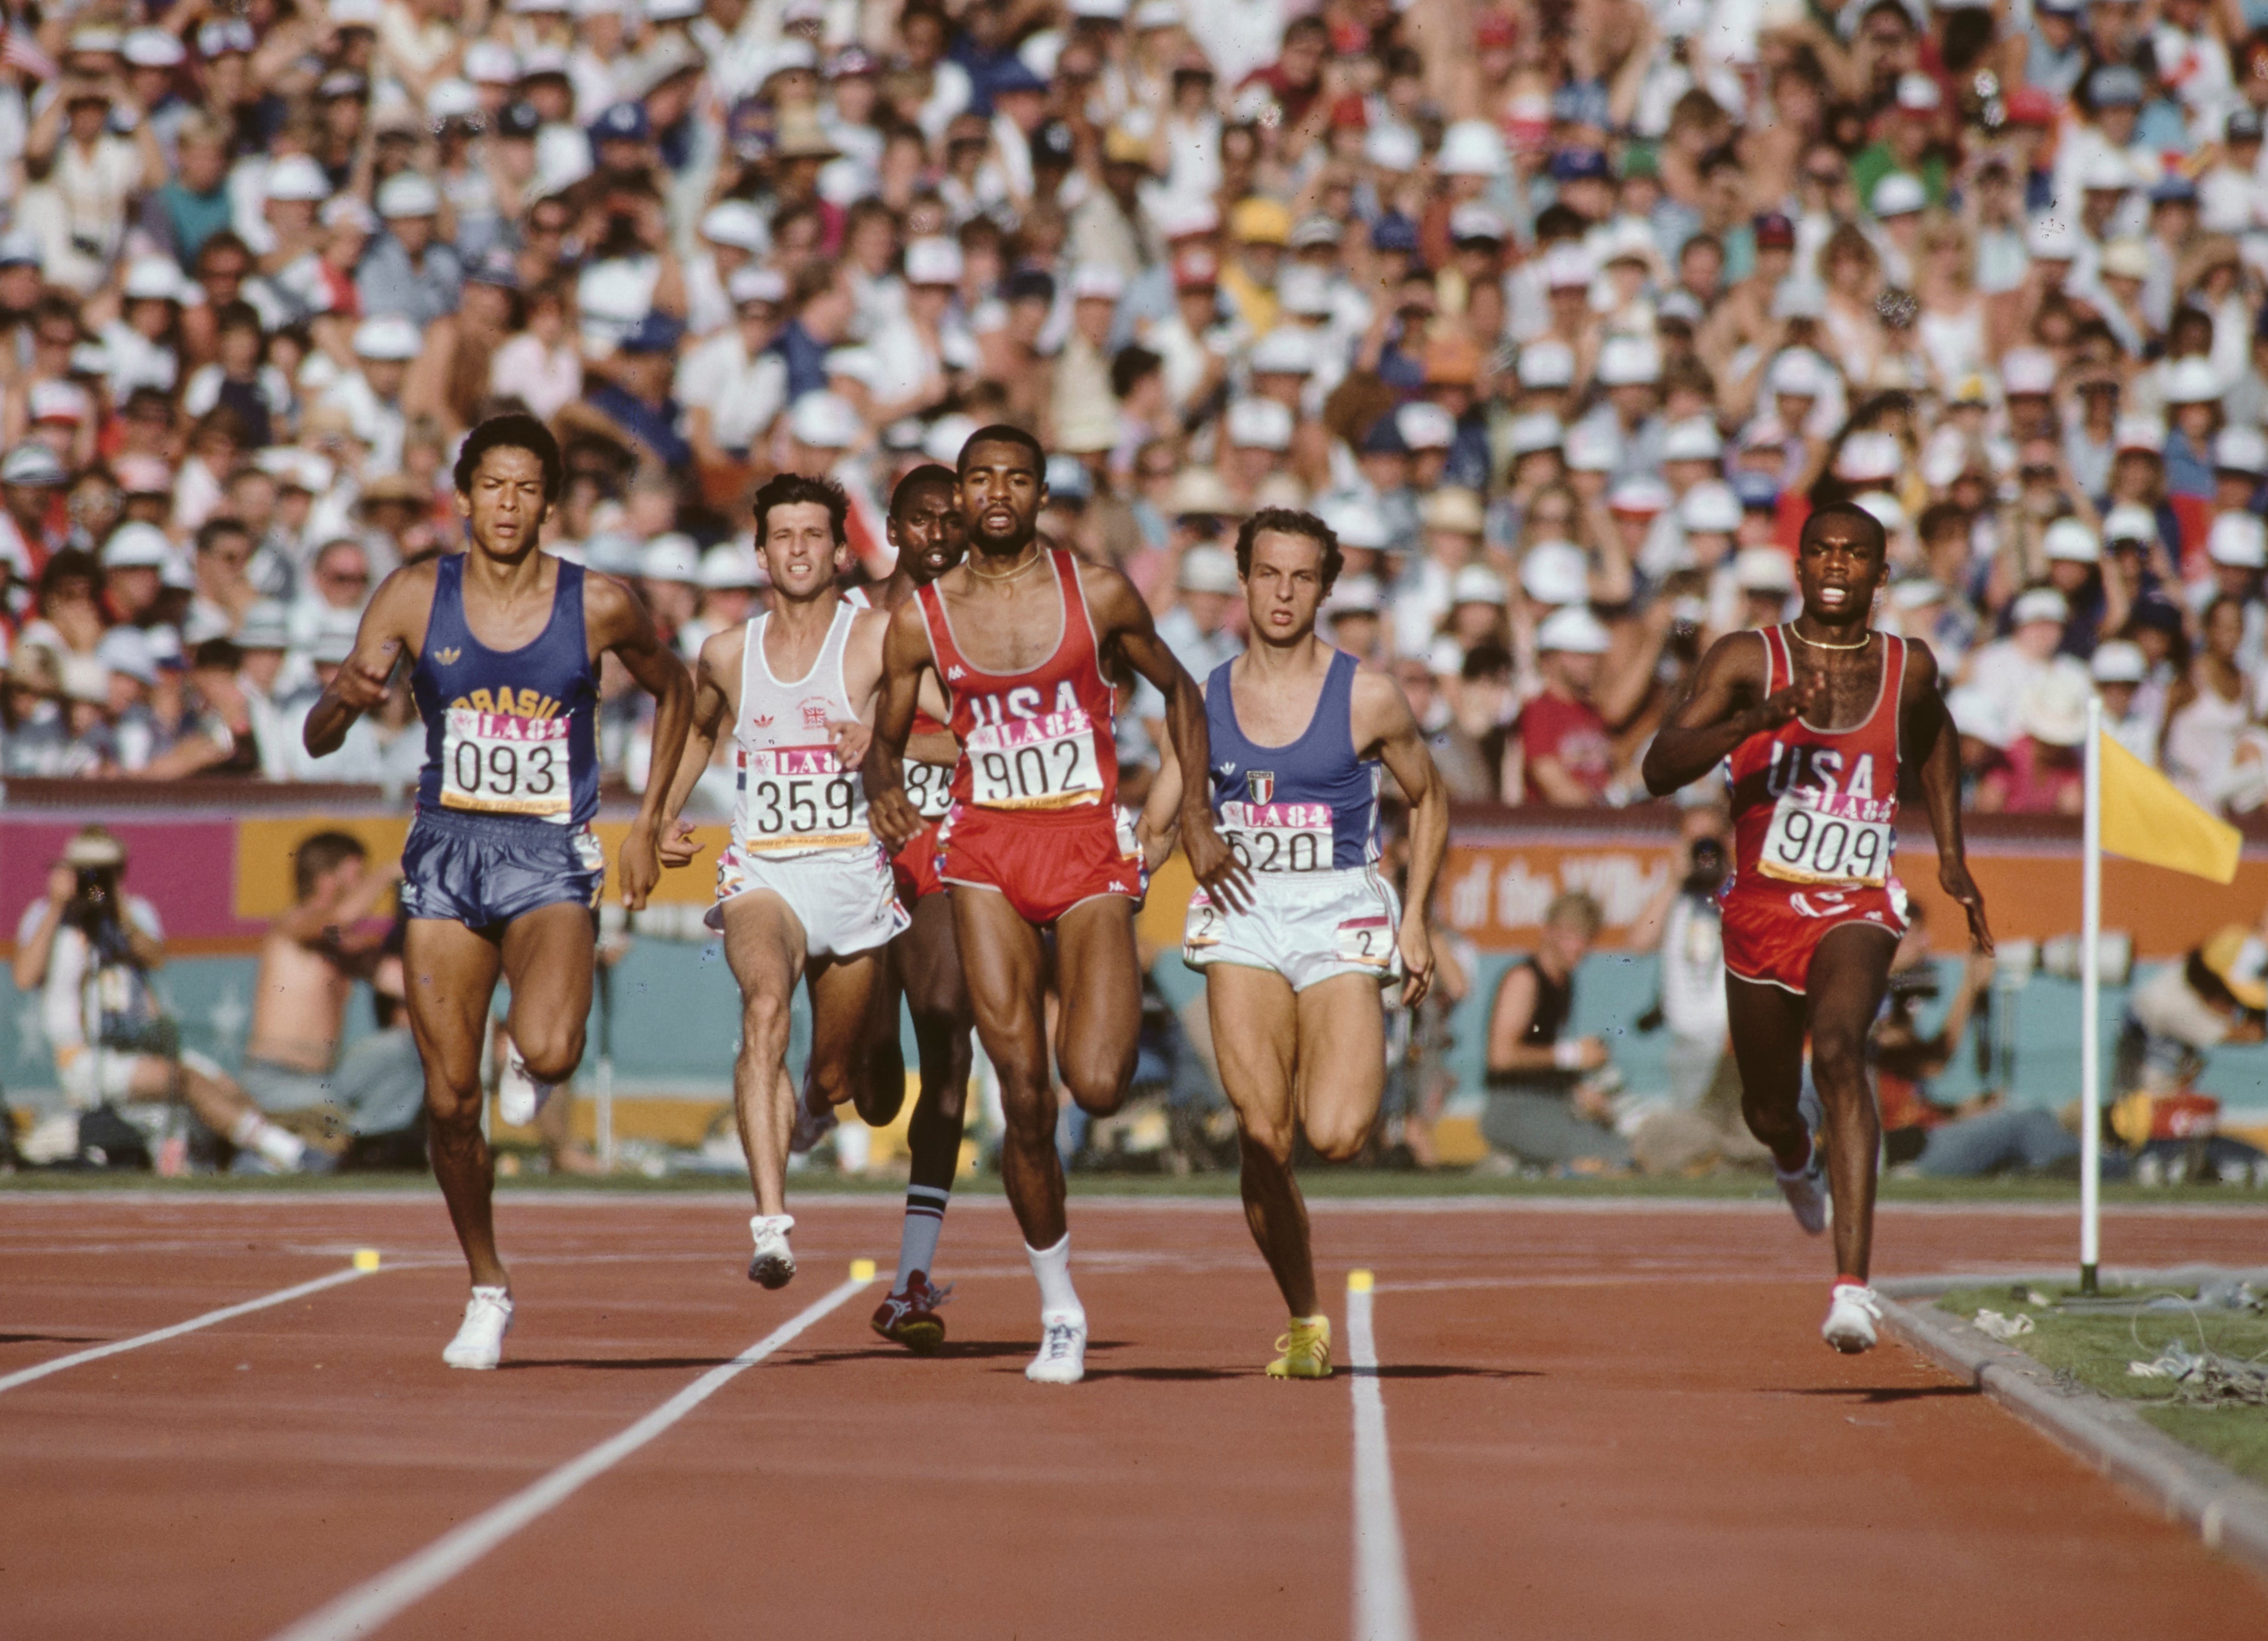 Gold medalist Joaquim Cruz #093 from Brazil leads from Johnny Gray #902 of the United States, Donato Sabia #520 of Italy and Earl Jones #909 of the United States running in the final of the Men's 800m metres race on 6th August 1984 during the XXIII Olympic Summer Games at the Los Angeles Memorial Coliseum in Los Angeles, California, United States.